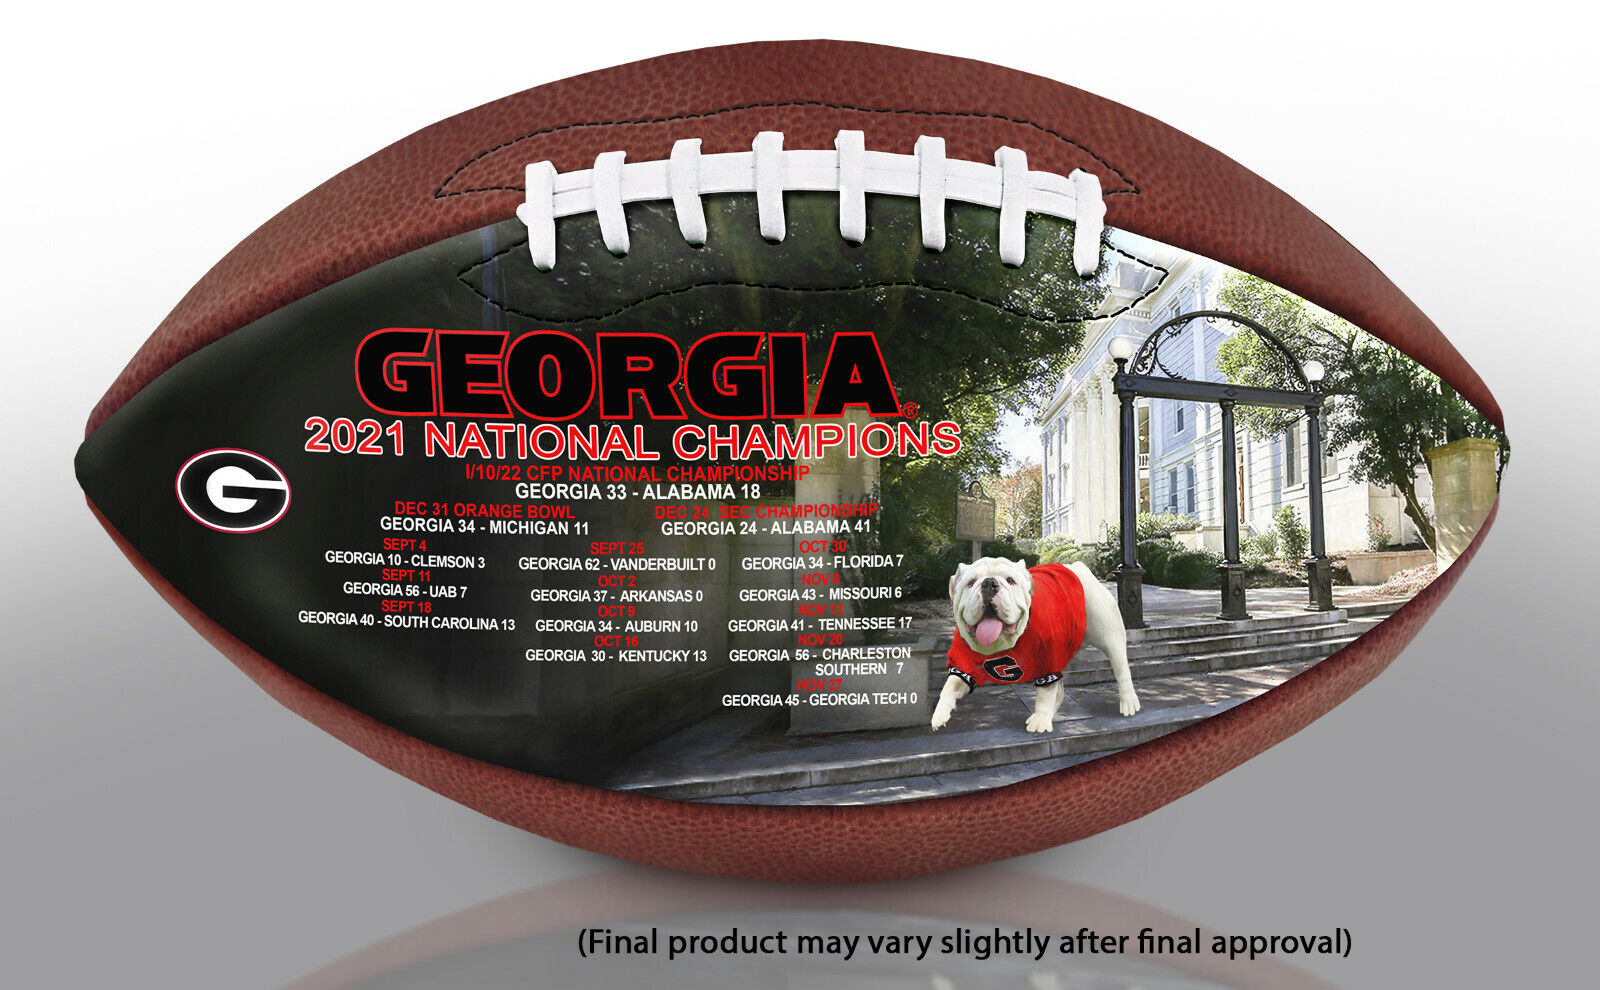 VICTORY ON CAMPUS GEORGIA FULL A 2021 CHAMPIONS NATIONAL SIZE autumn Cheap bargain and winter new